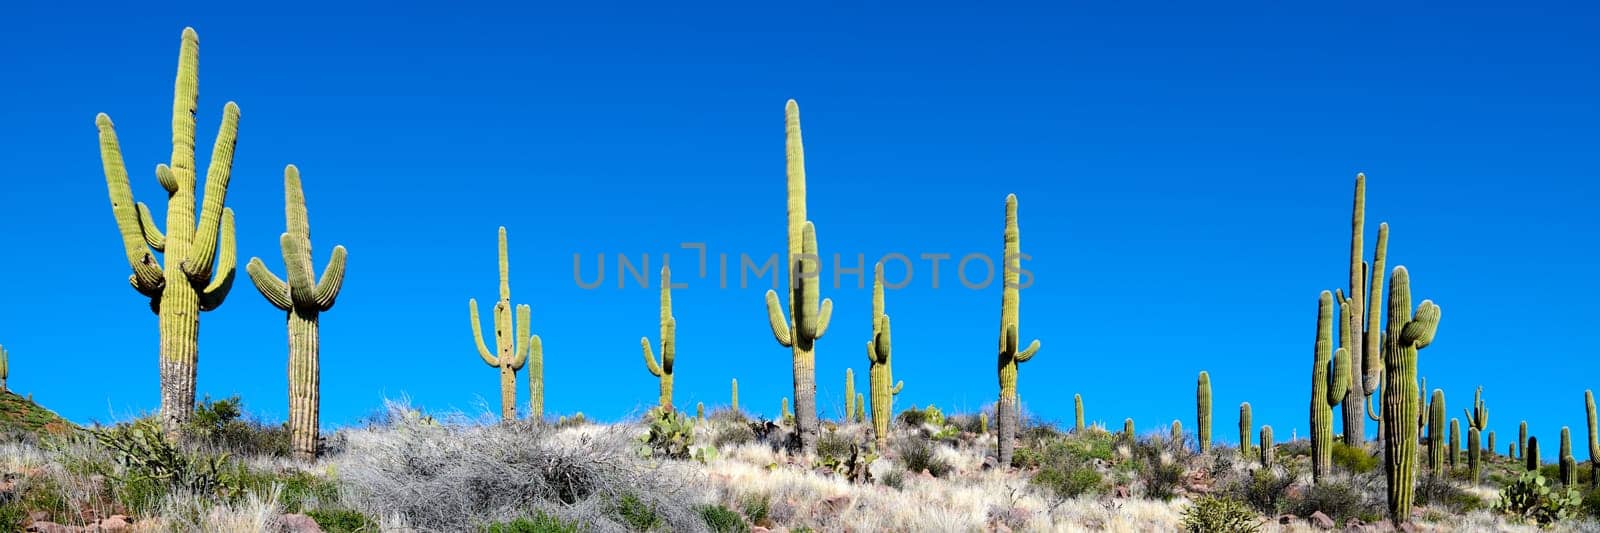 Saguaro Cactus growing on a rocky hillside in Tonto National Forest, Arizona by patrickstock